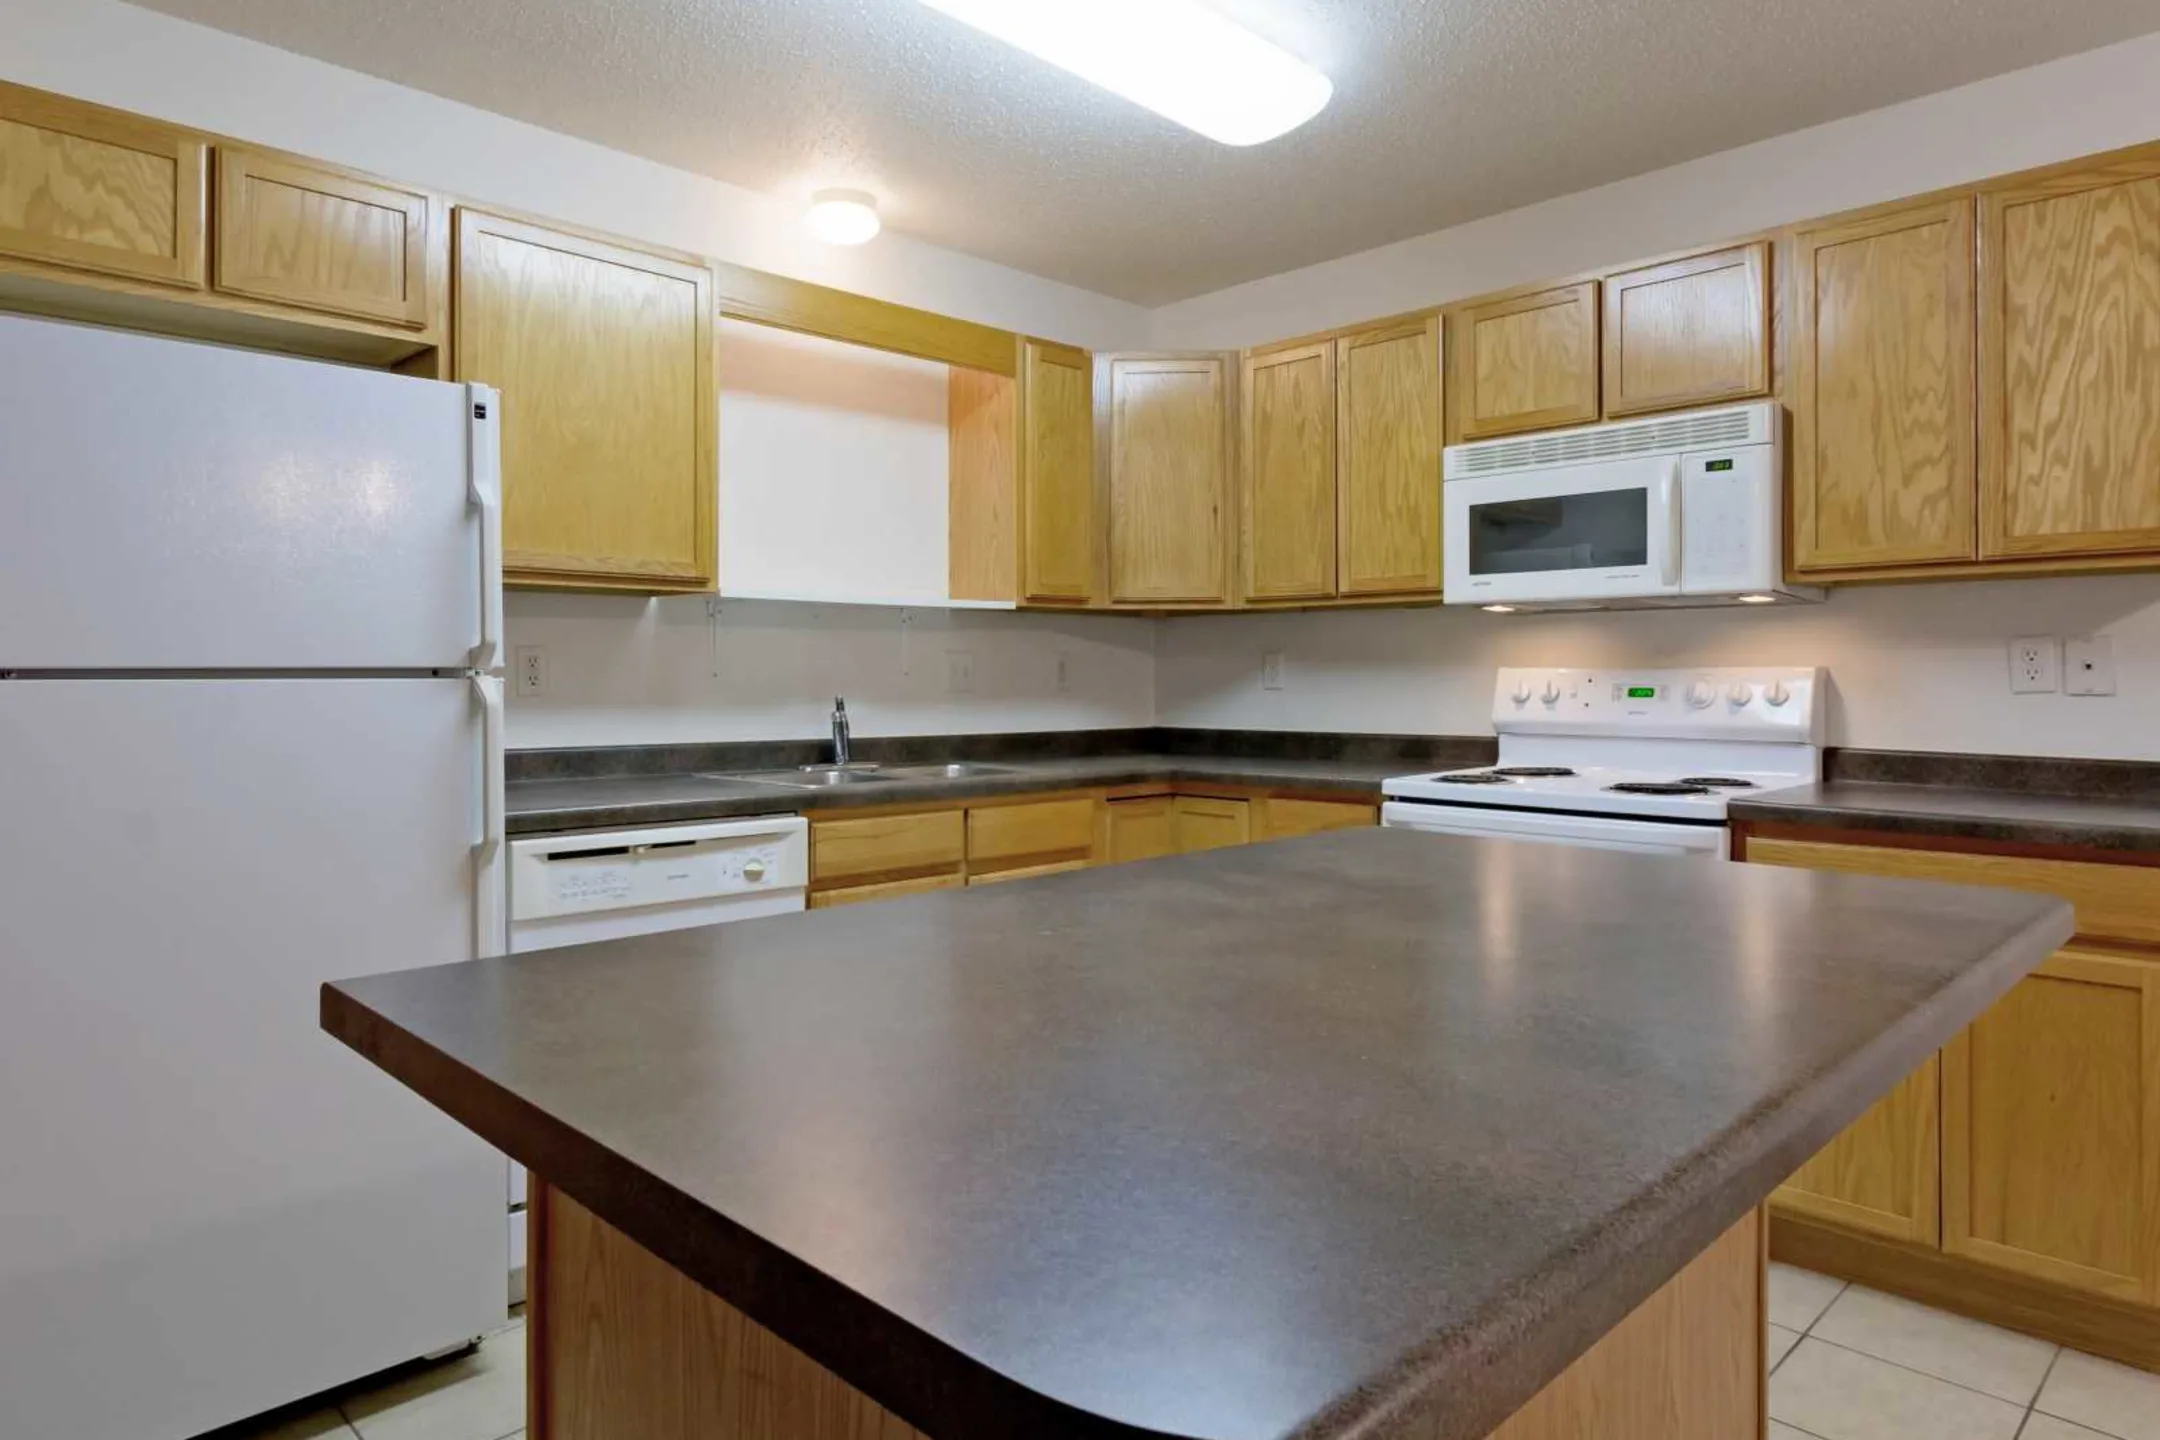 Kitchen - The Woods Apartments - Fargo, ND